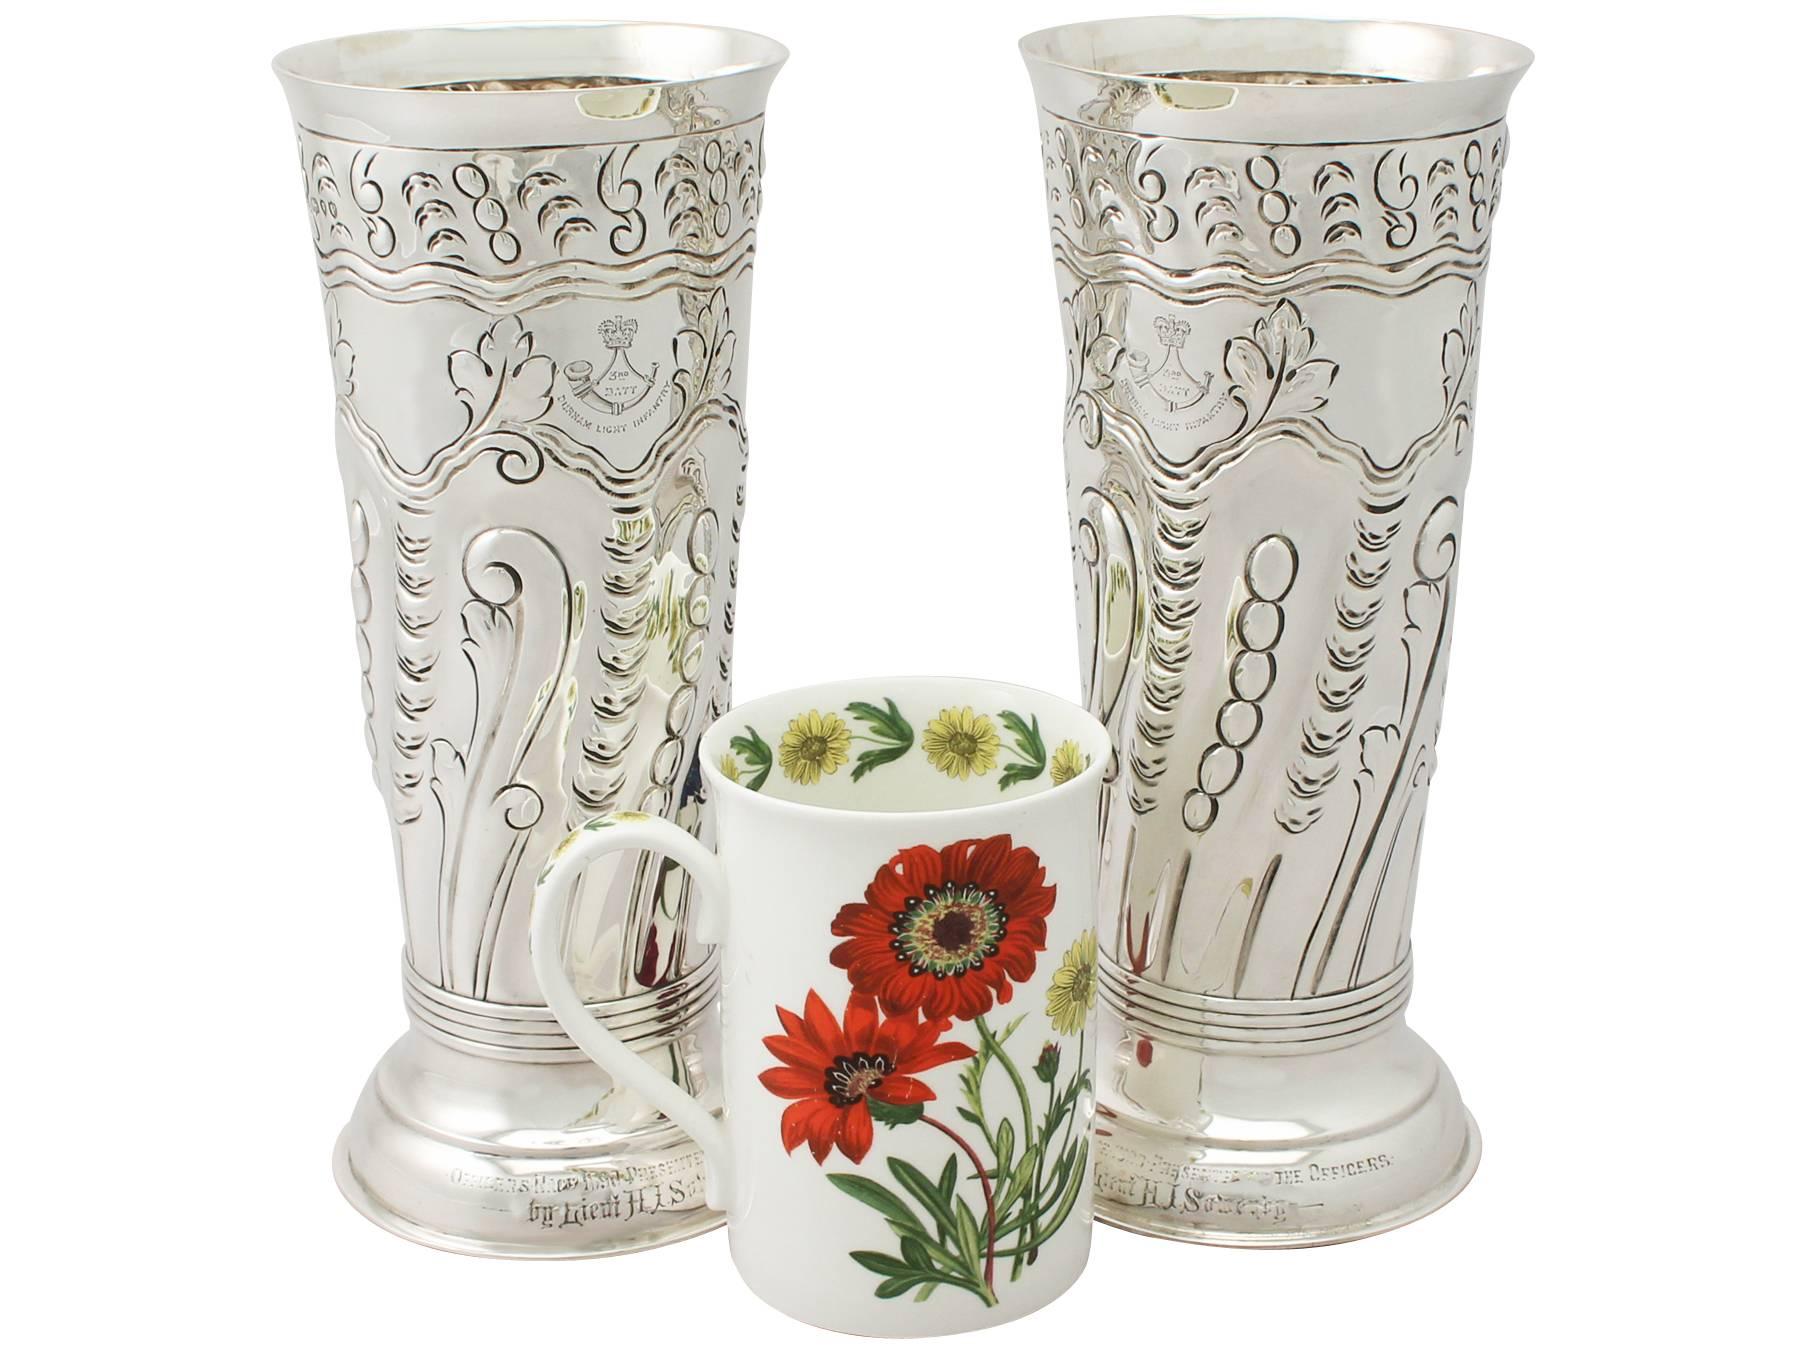 A fine and impressive pair of antique Victorian English sterling silver vases with military interest (Durham Light Infantry); an addition to our ornamental silverware collection.

These fine antique silver vases have a tapering cylindrical form to